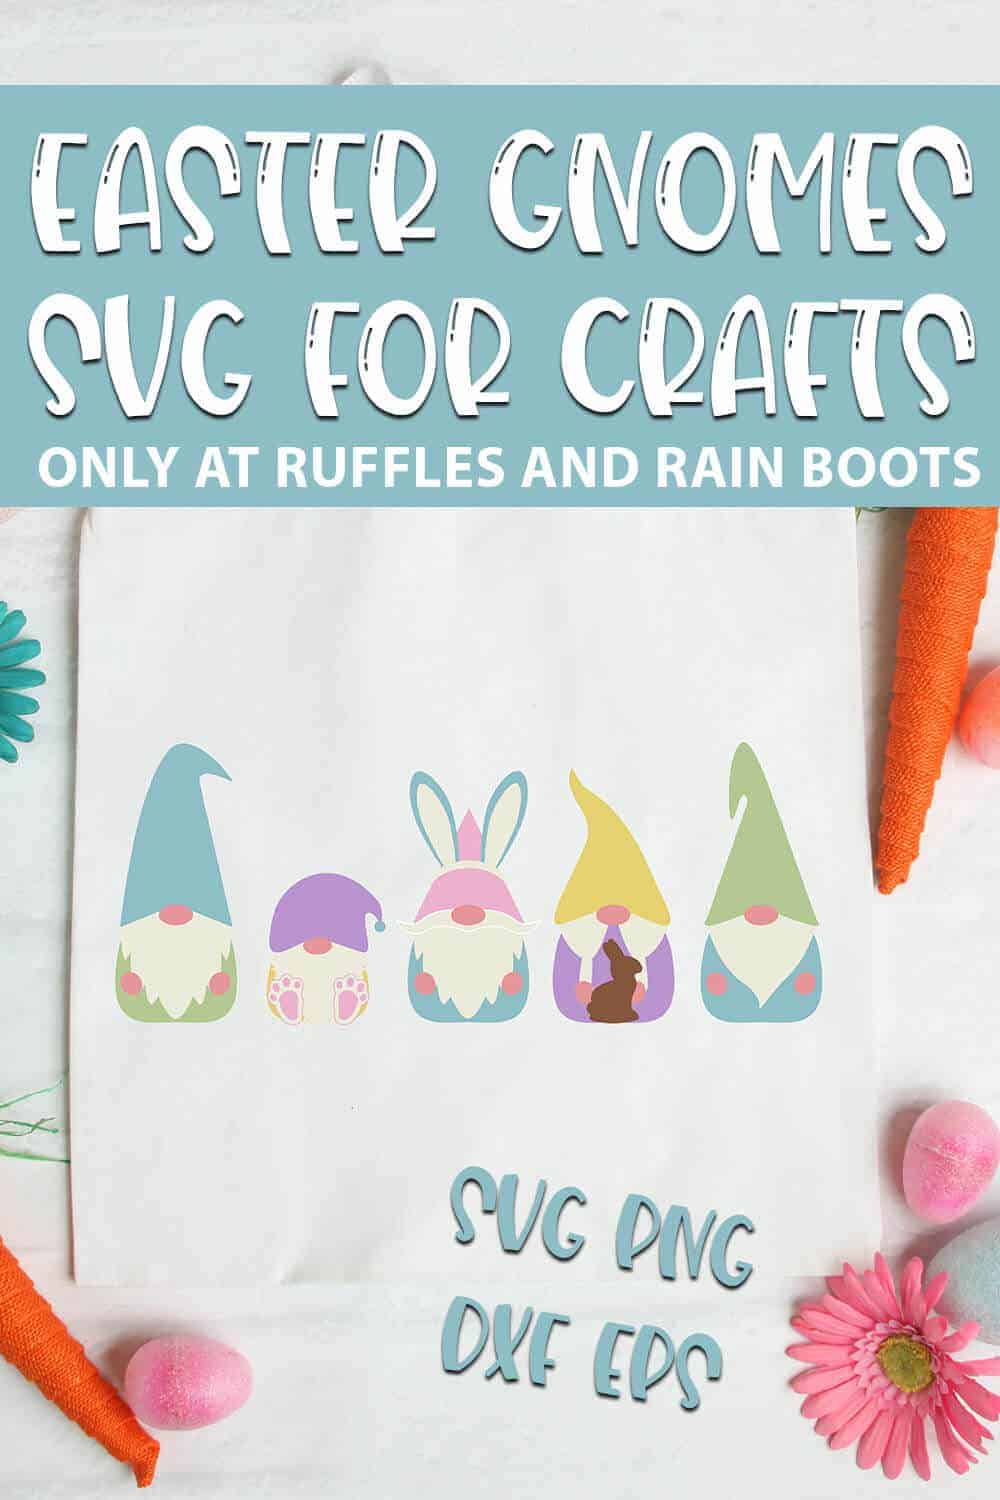 Easter Gnome SVGs For easter cricut crafts with text which reads easter gnomes svg for crafts svg png dxf eps